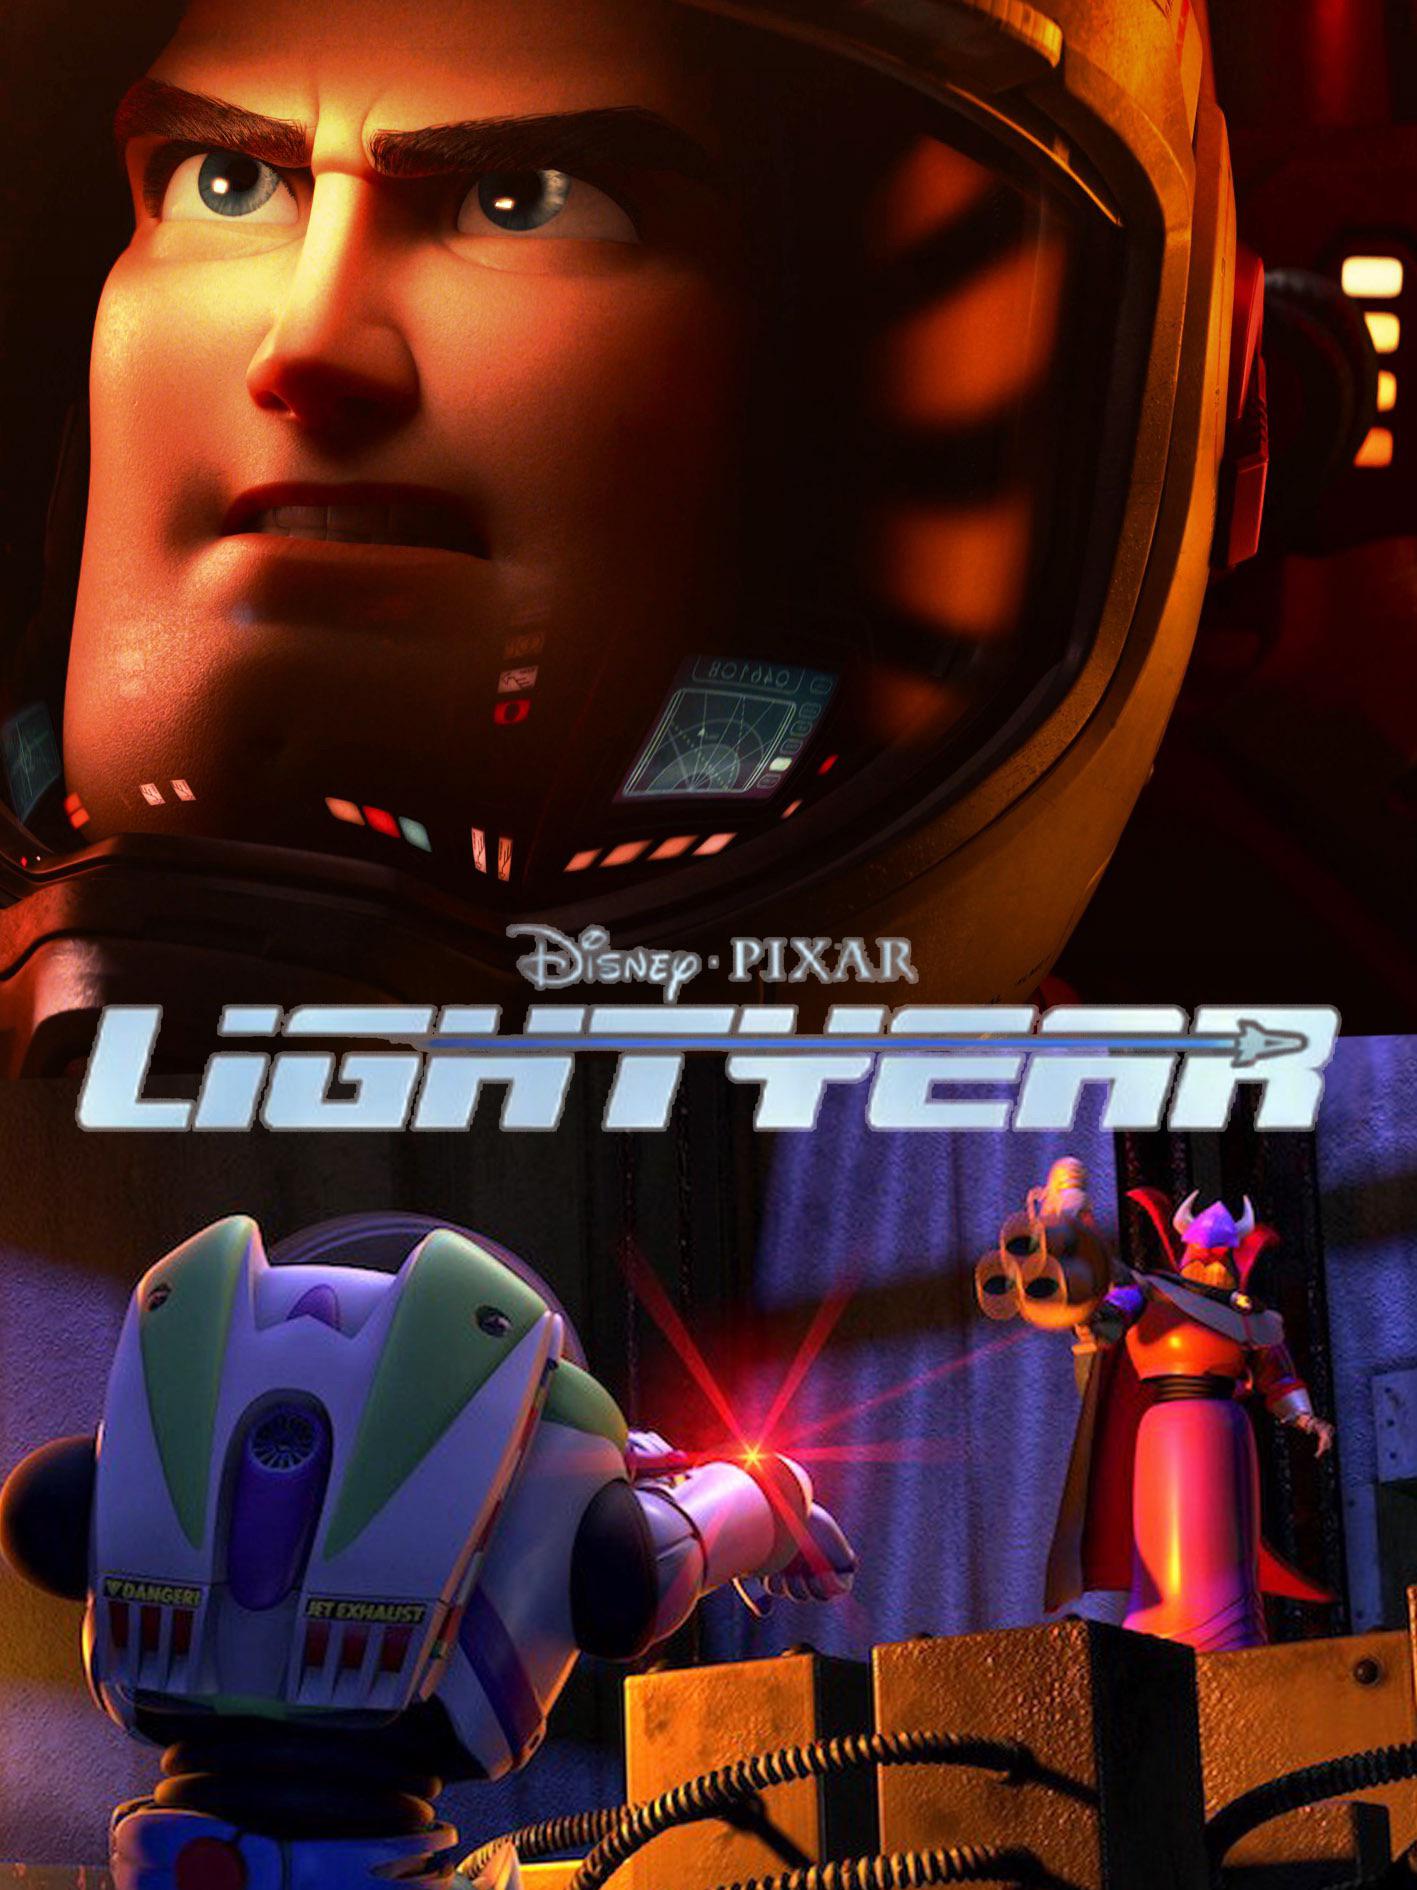 I made a movie poster for the Lightyear movie that was announced yesterday : r/Pixar